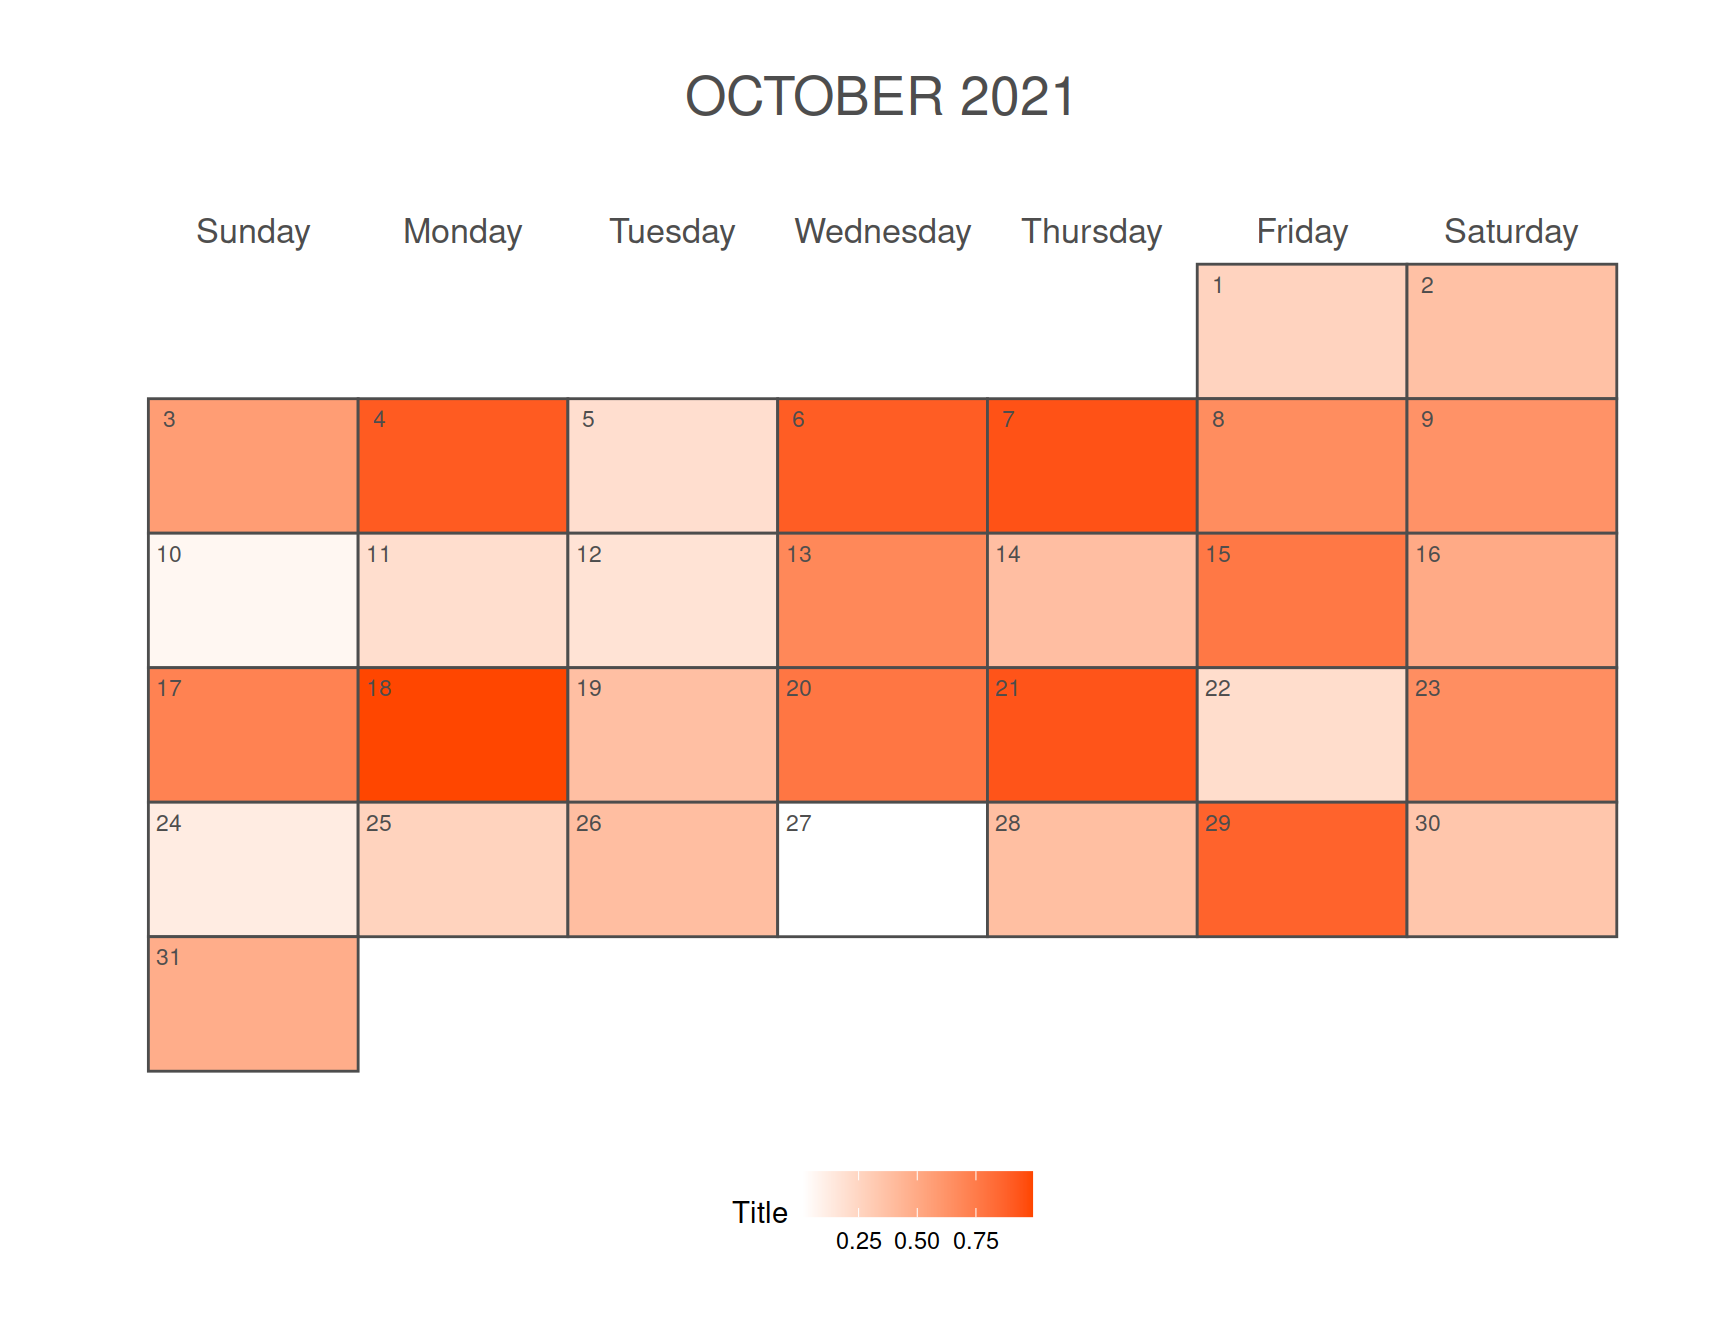 Monthly calendar as a heat map in ggplot2 with legend